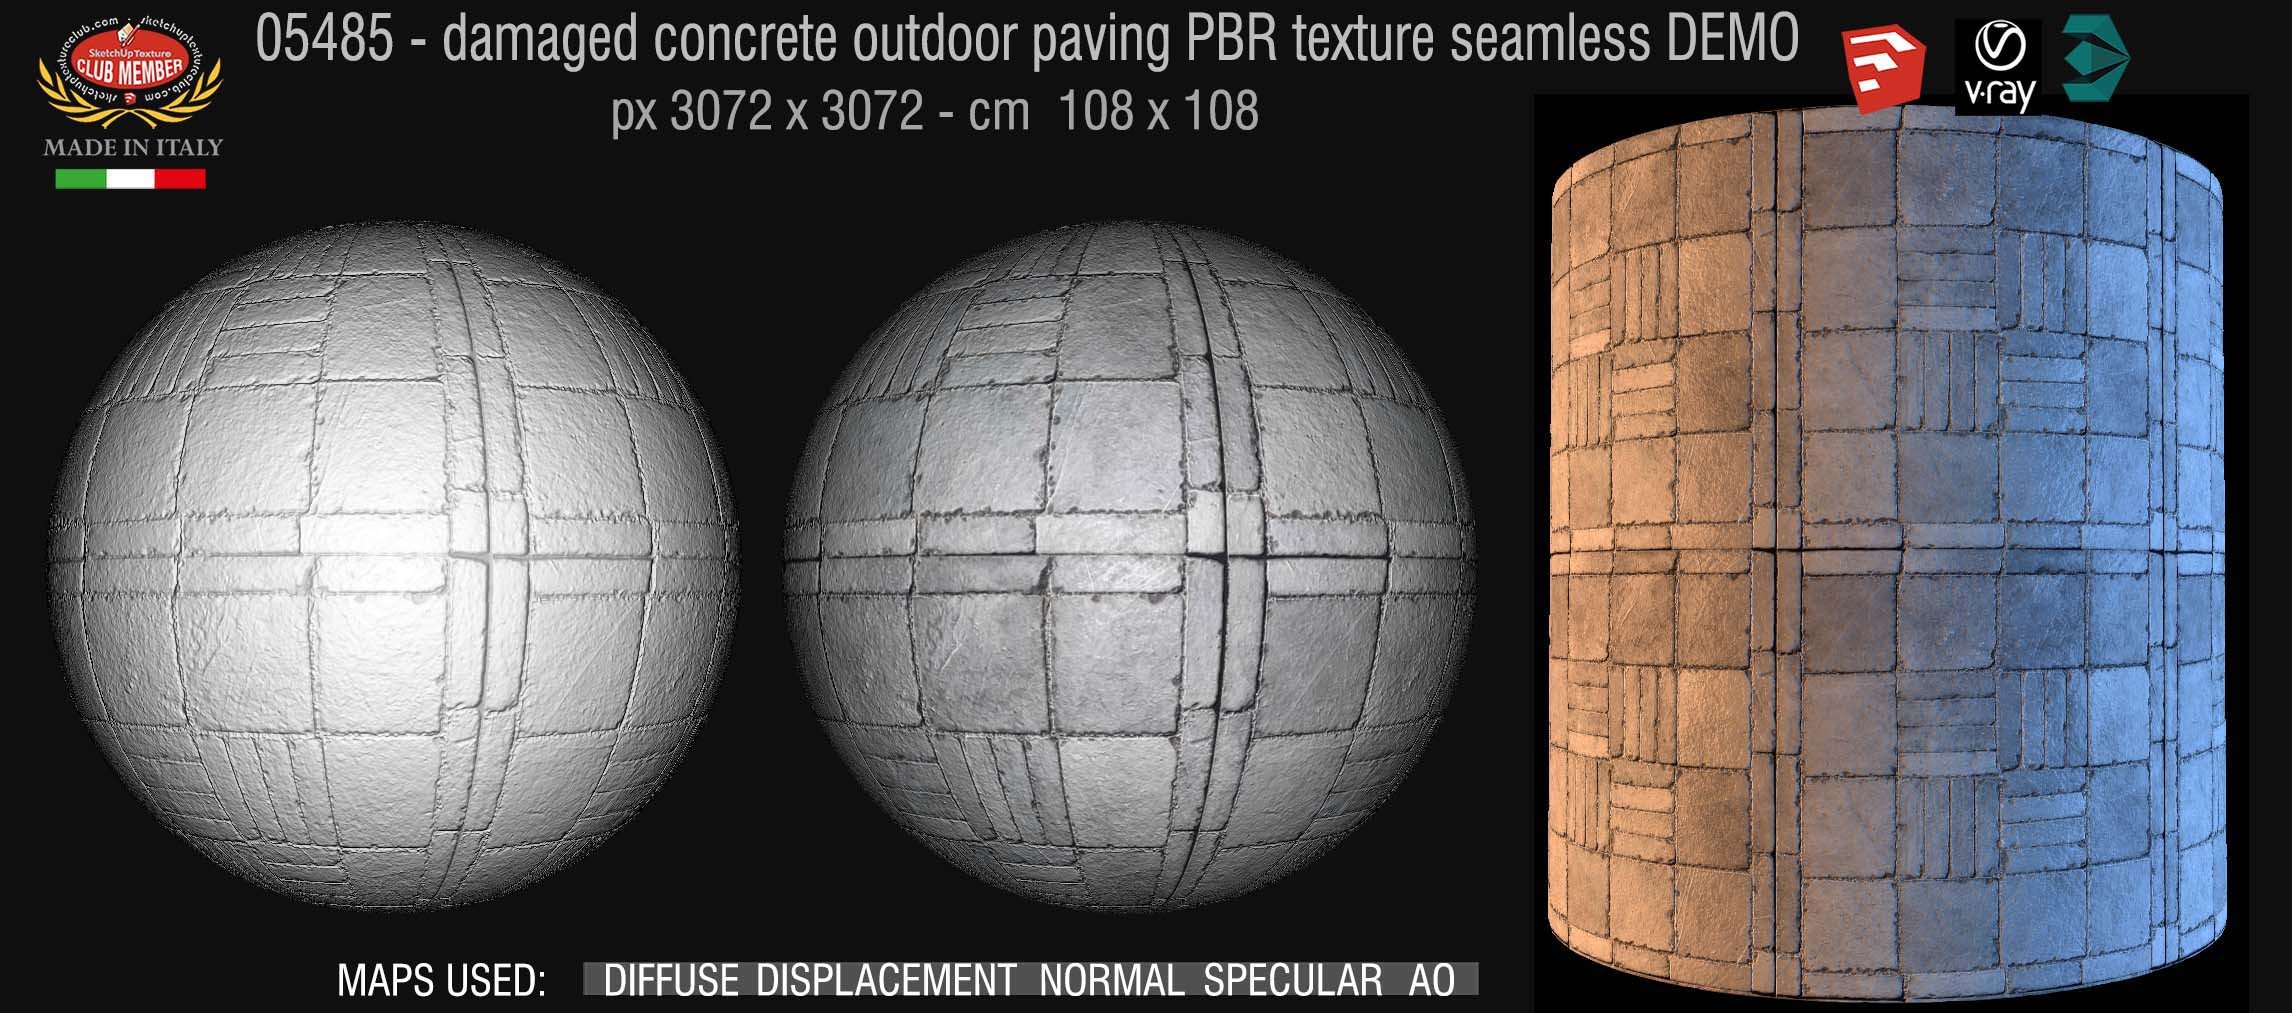 05485 Damaged concrete outdoor paving PBR texture seamless DEMO